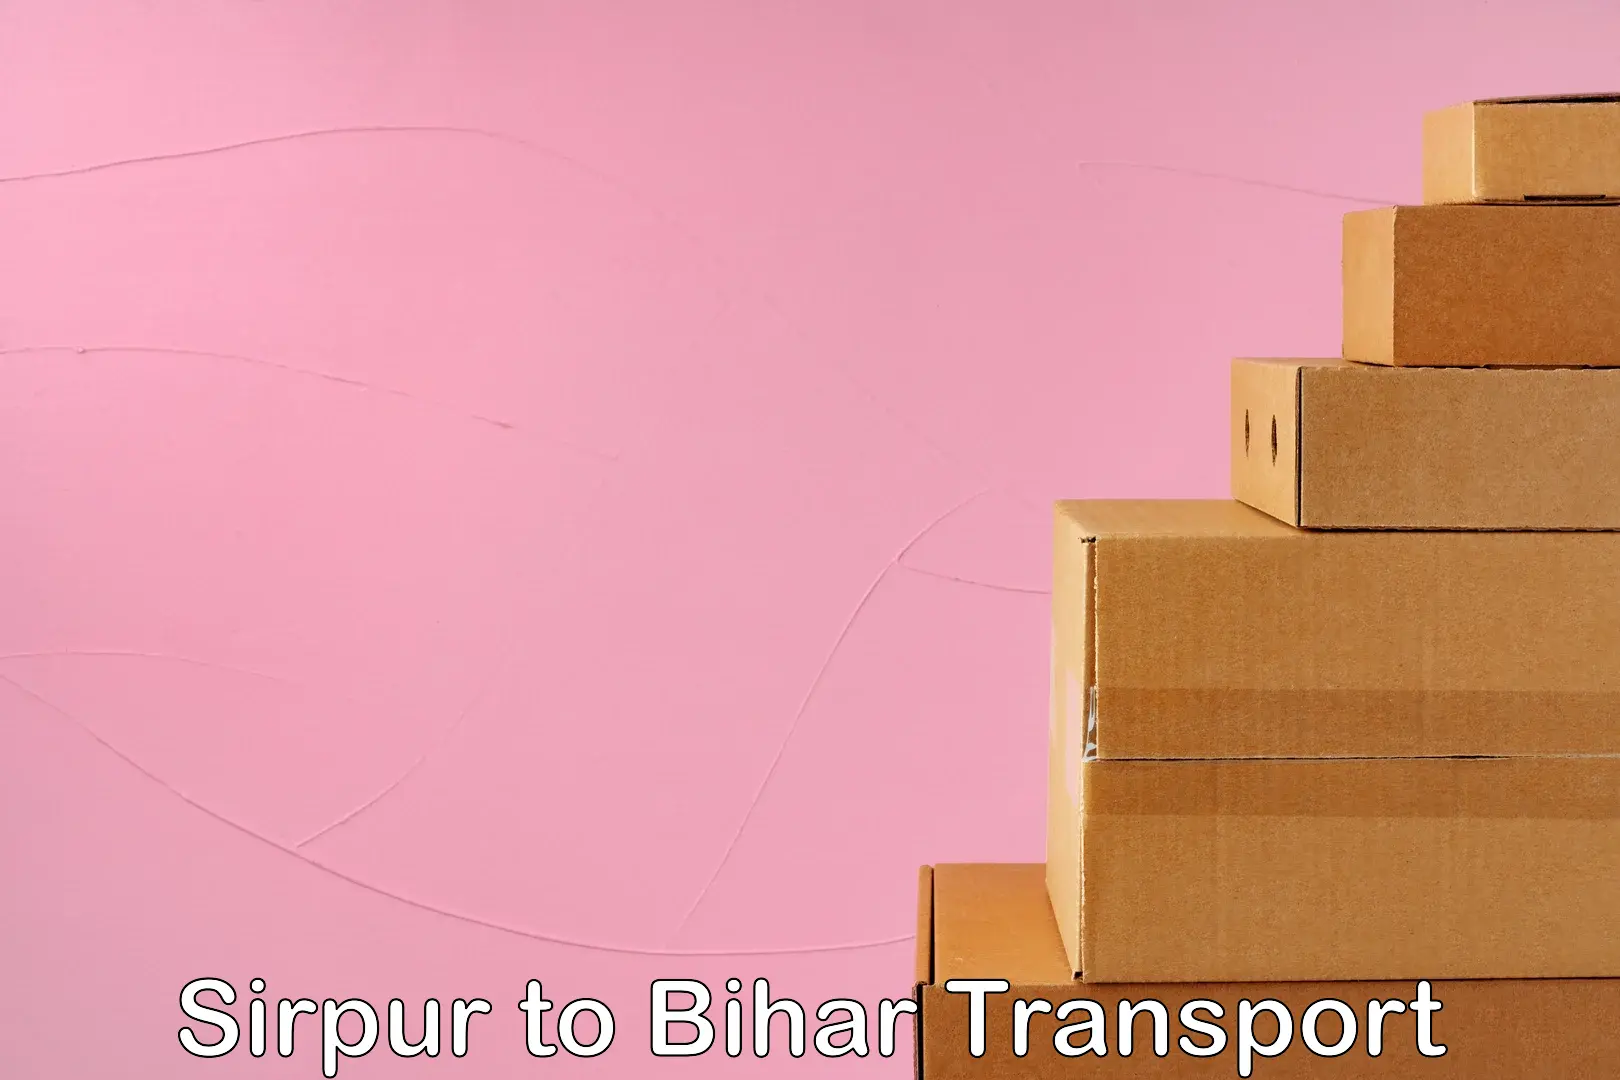 Transport in sharing Sirpur to Fatwah